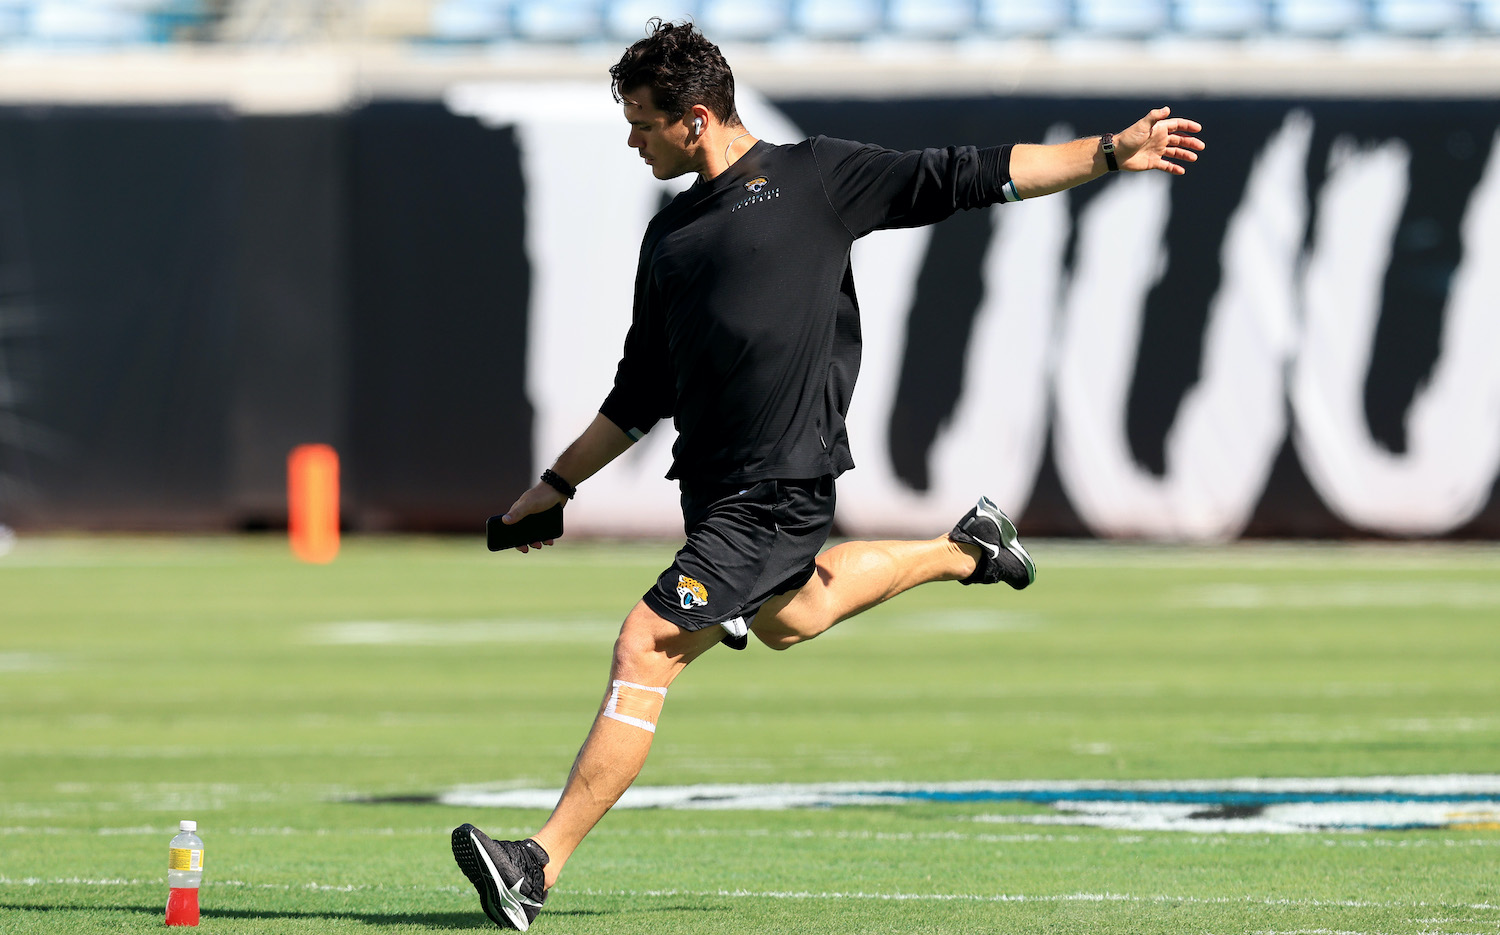 Josh Lambo #4 of the Jacksonville Jaguars warms up prior to the game against the Arizona Cardinals at TIAA Bank Field on September 26, 2021 in Jacksonville, Florida. (Photo by Sam Greenwood/Getty Images)